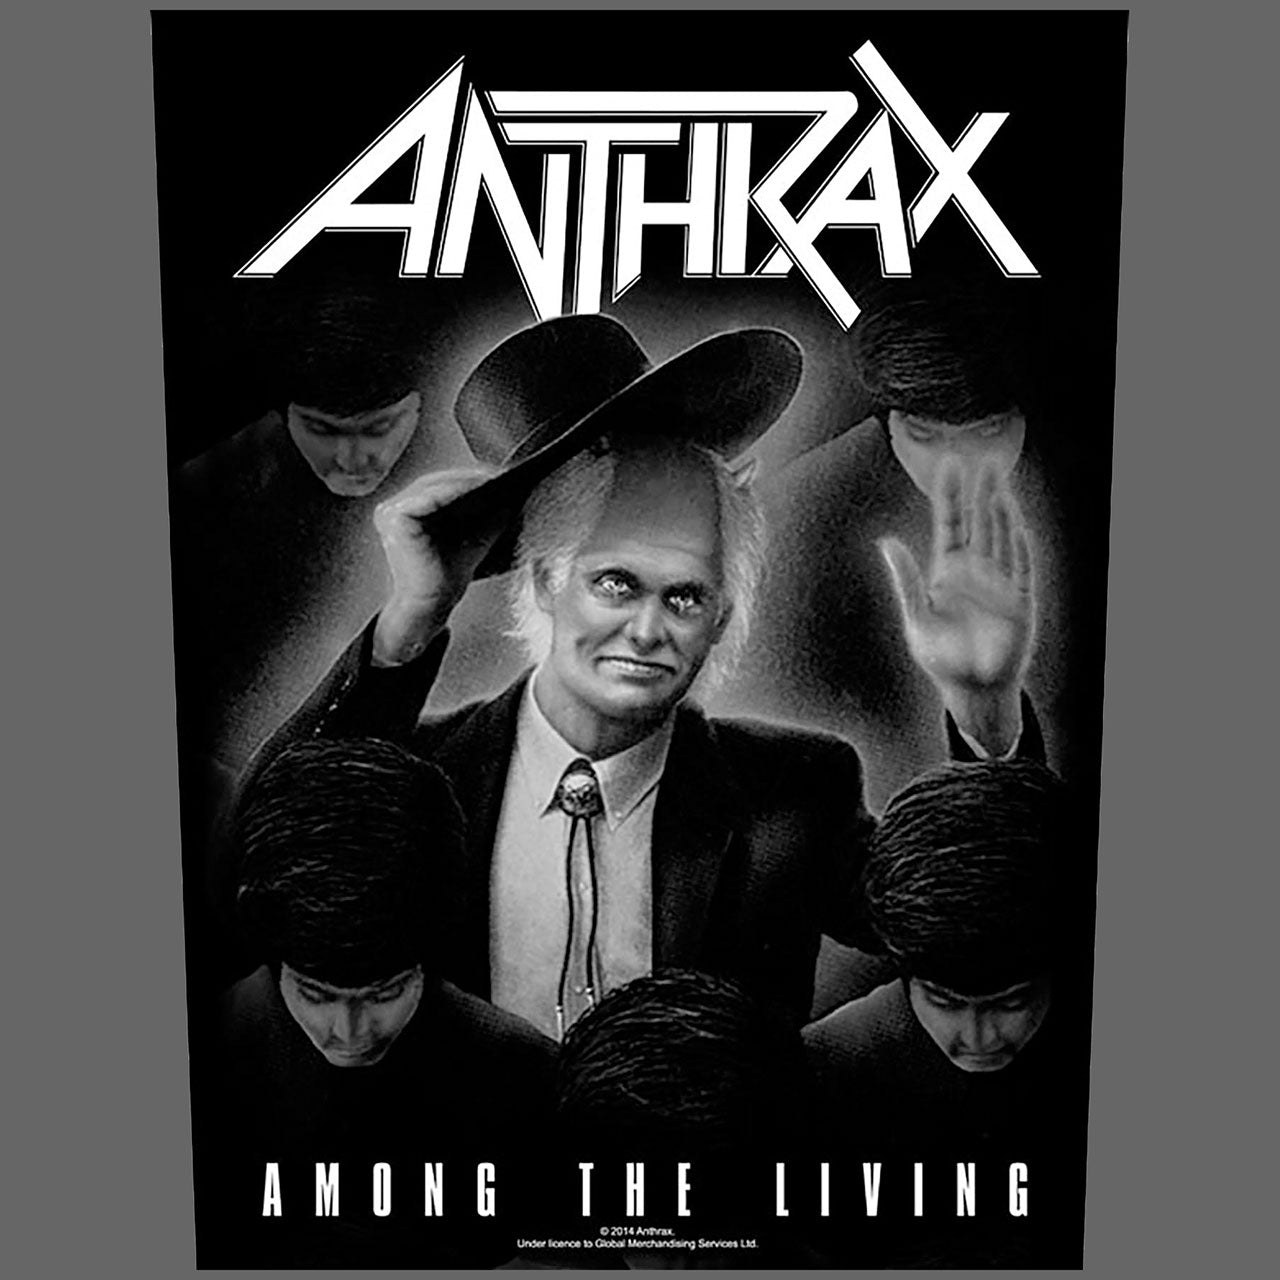 Anthrax - Among the Living (Backpatch)